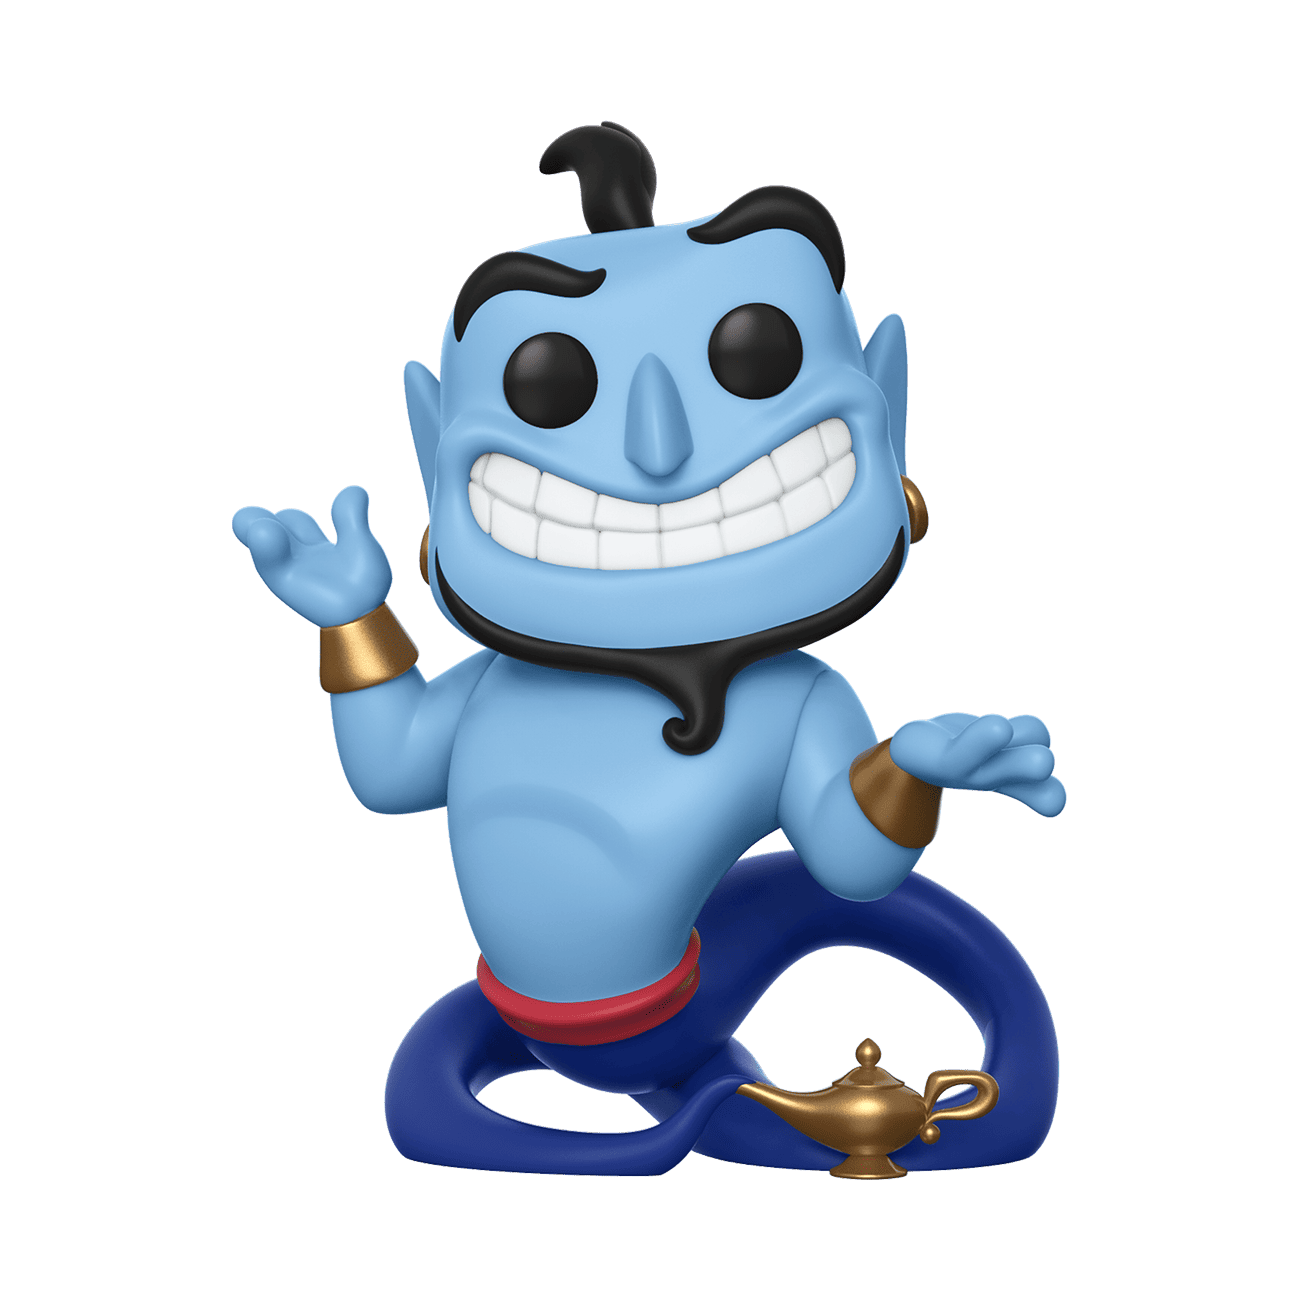 Buy Pop! Genie with Lamp at Funko.